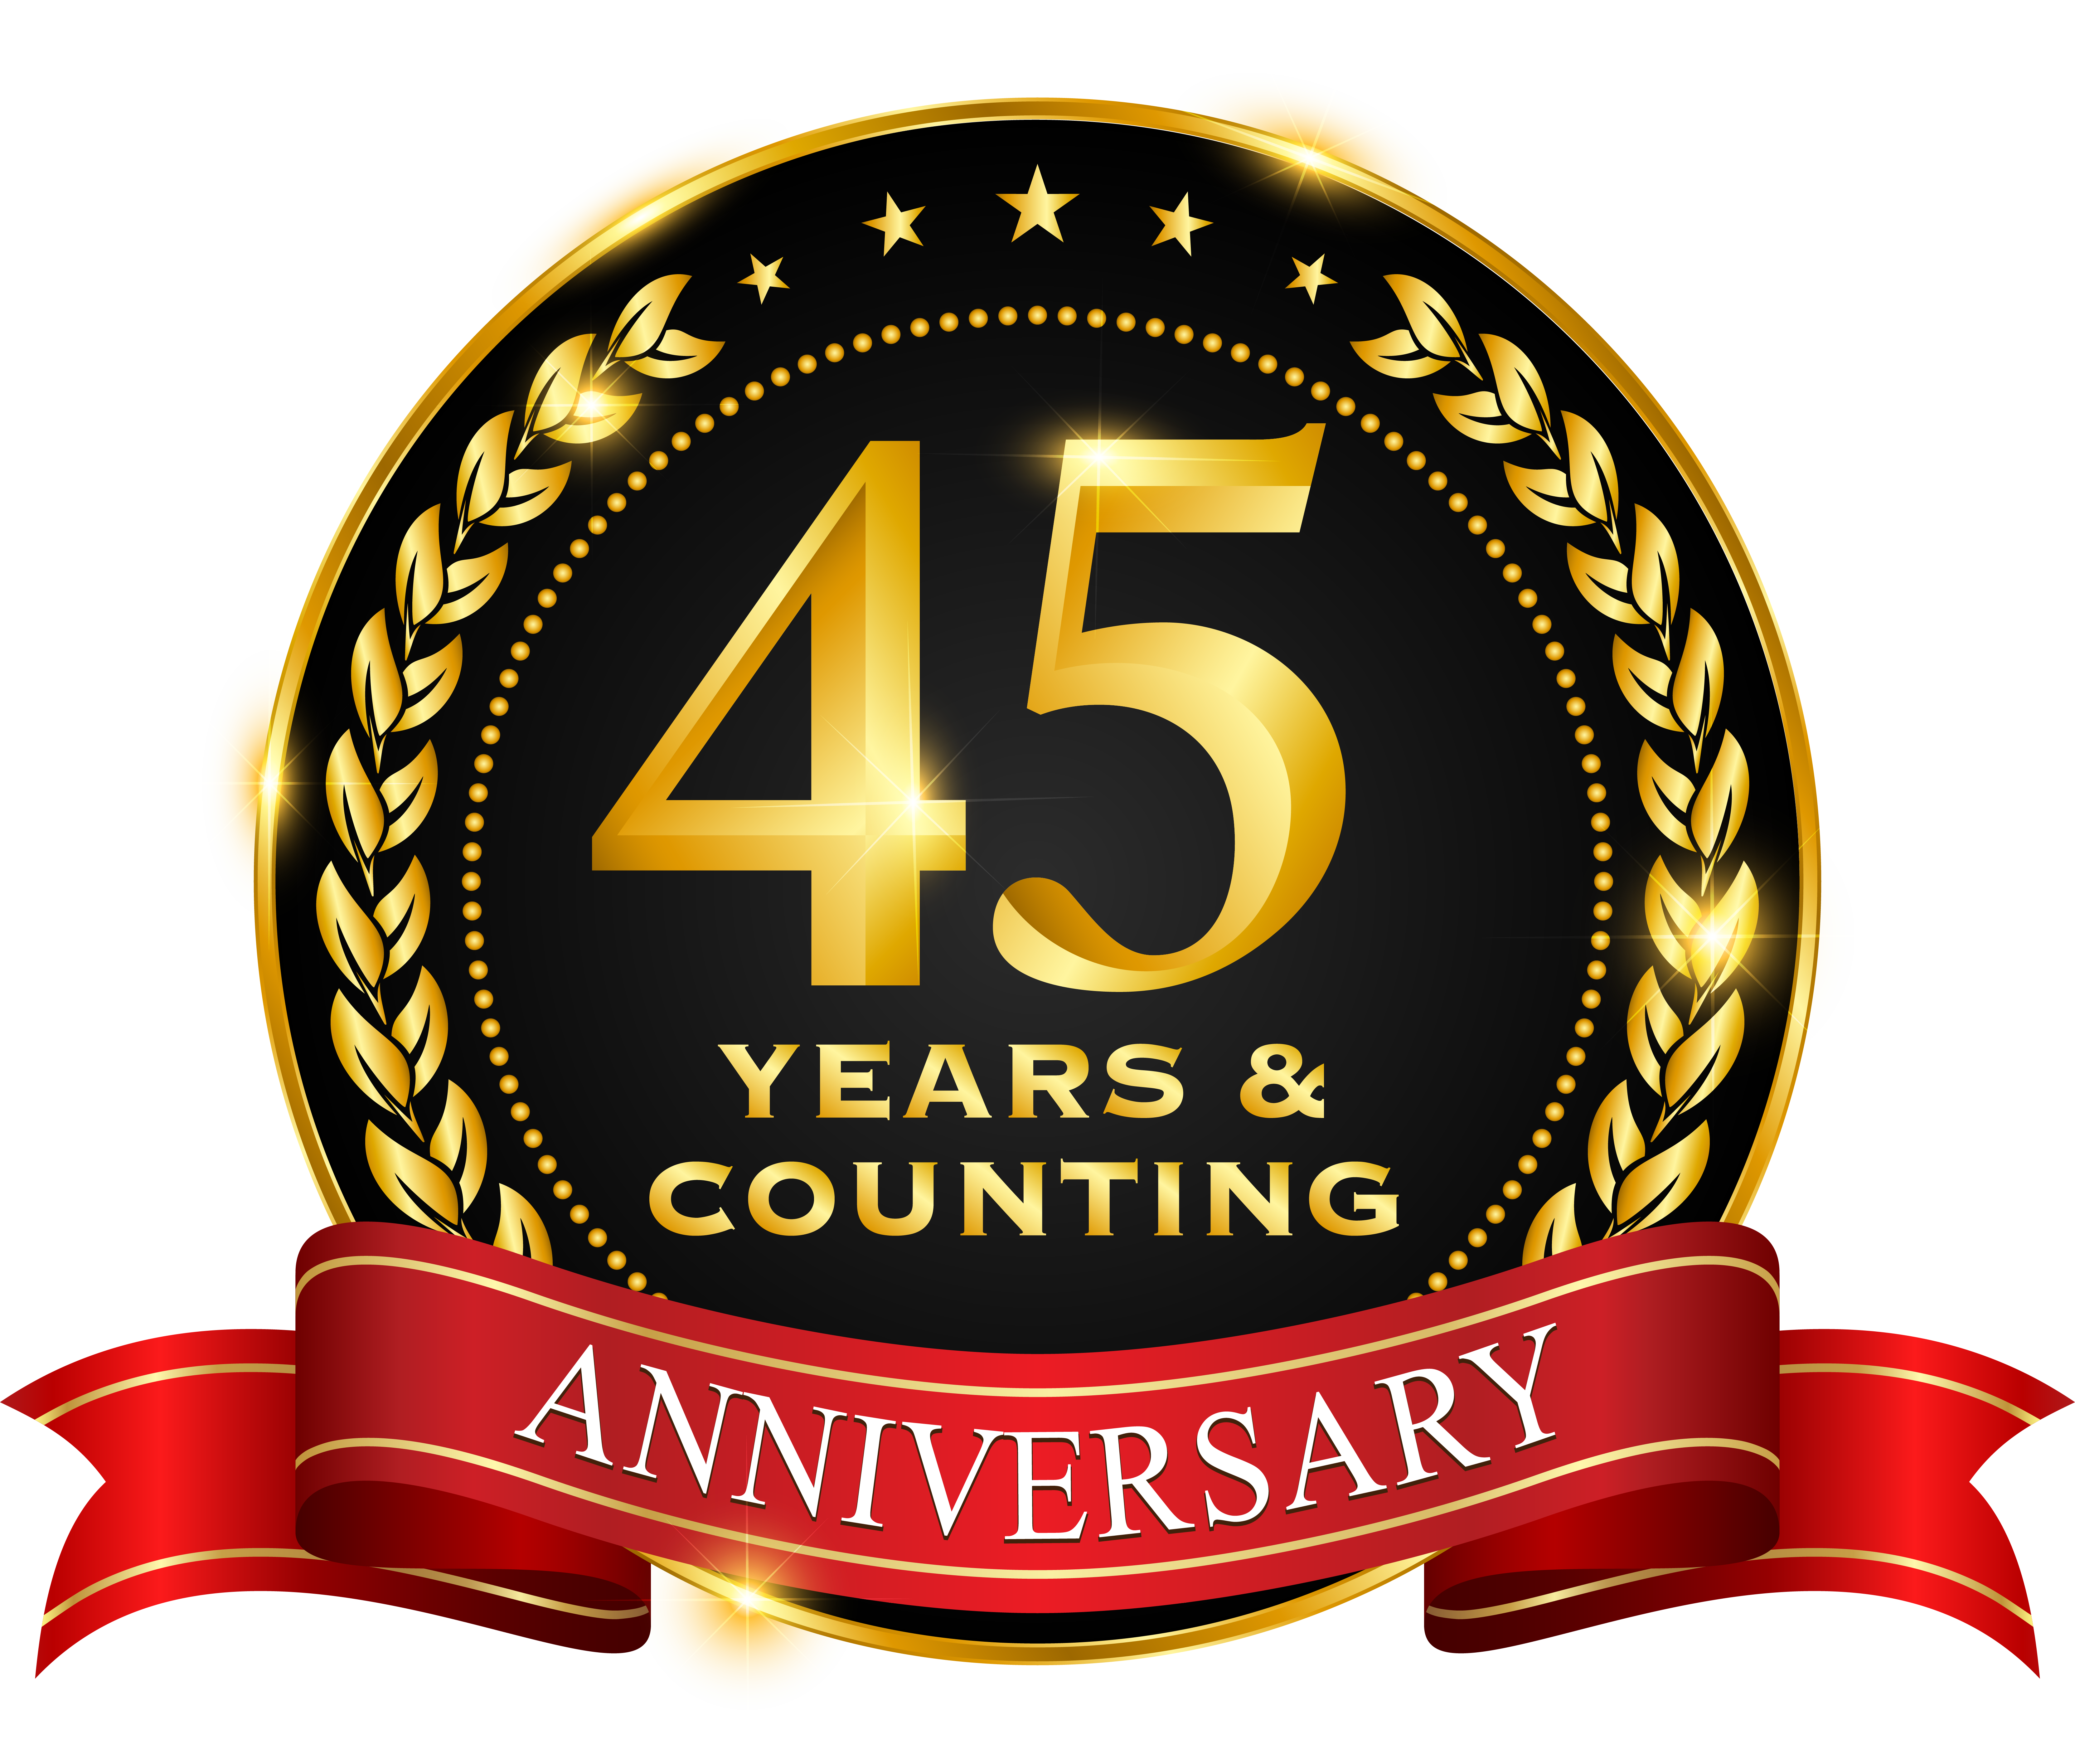 Source North America Corporation is proud to serve you for over 45 years